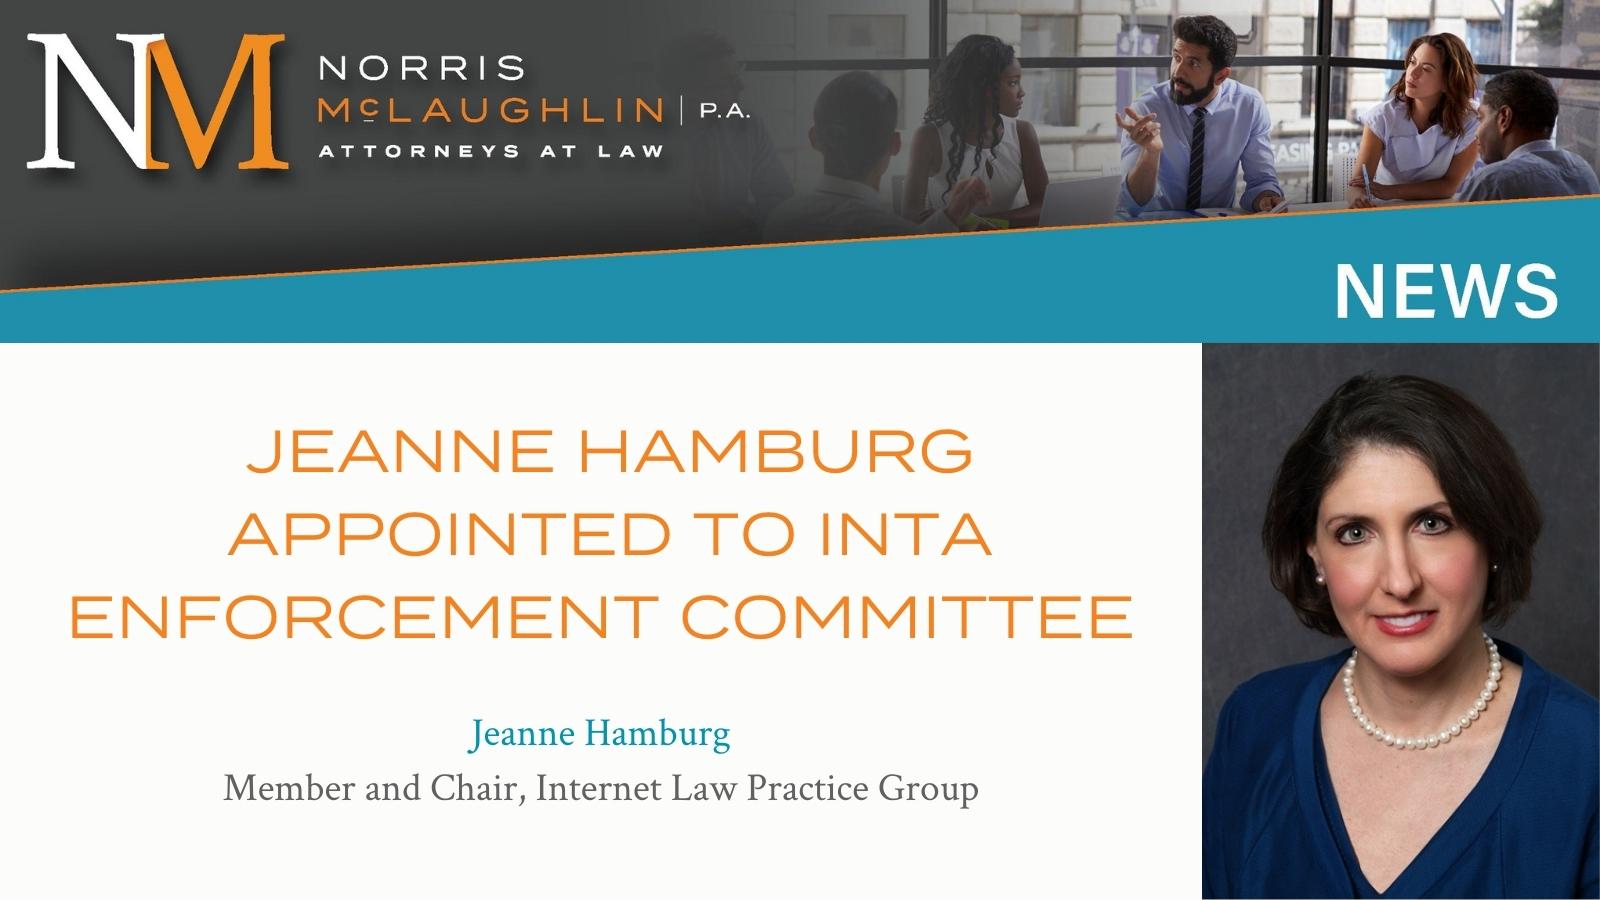 Norris McLaughlin’s Jeanne Hamburg Appointed to INTA Enforcement Committee